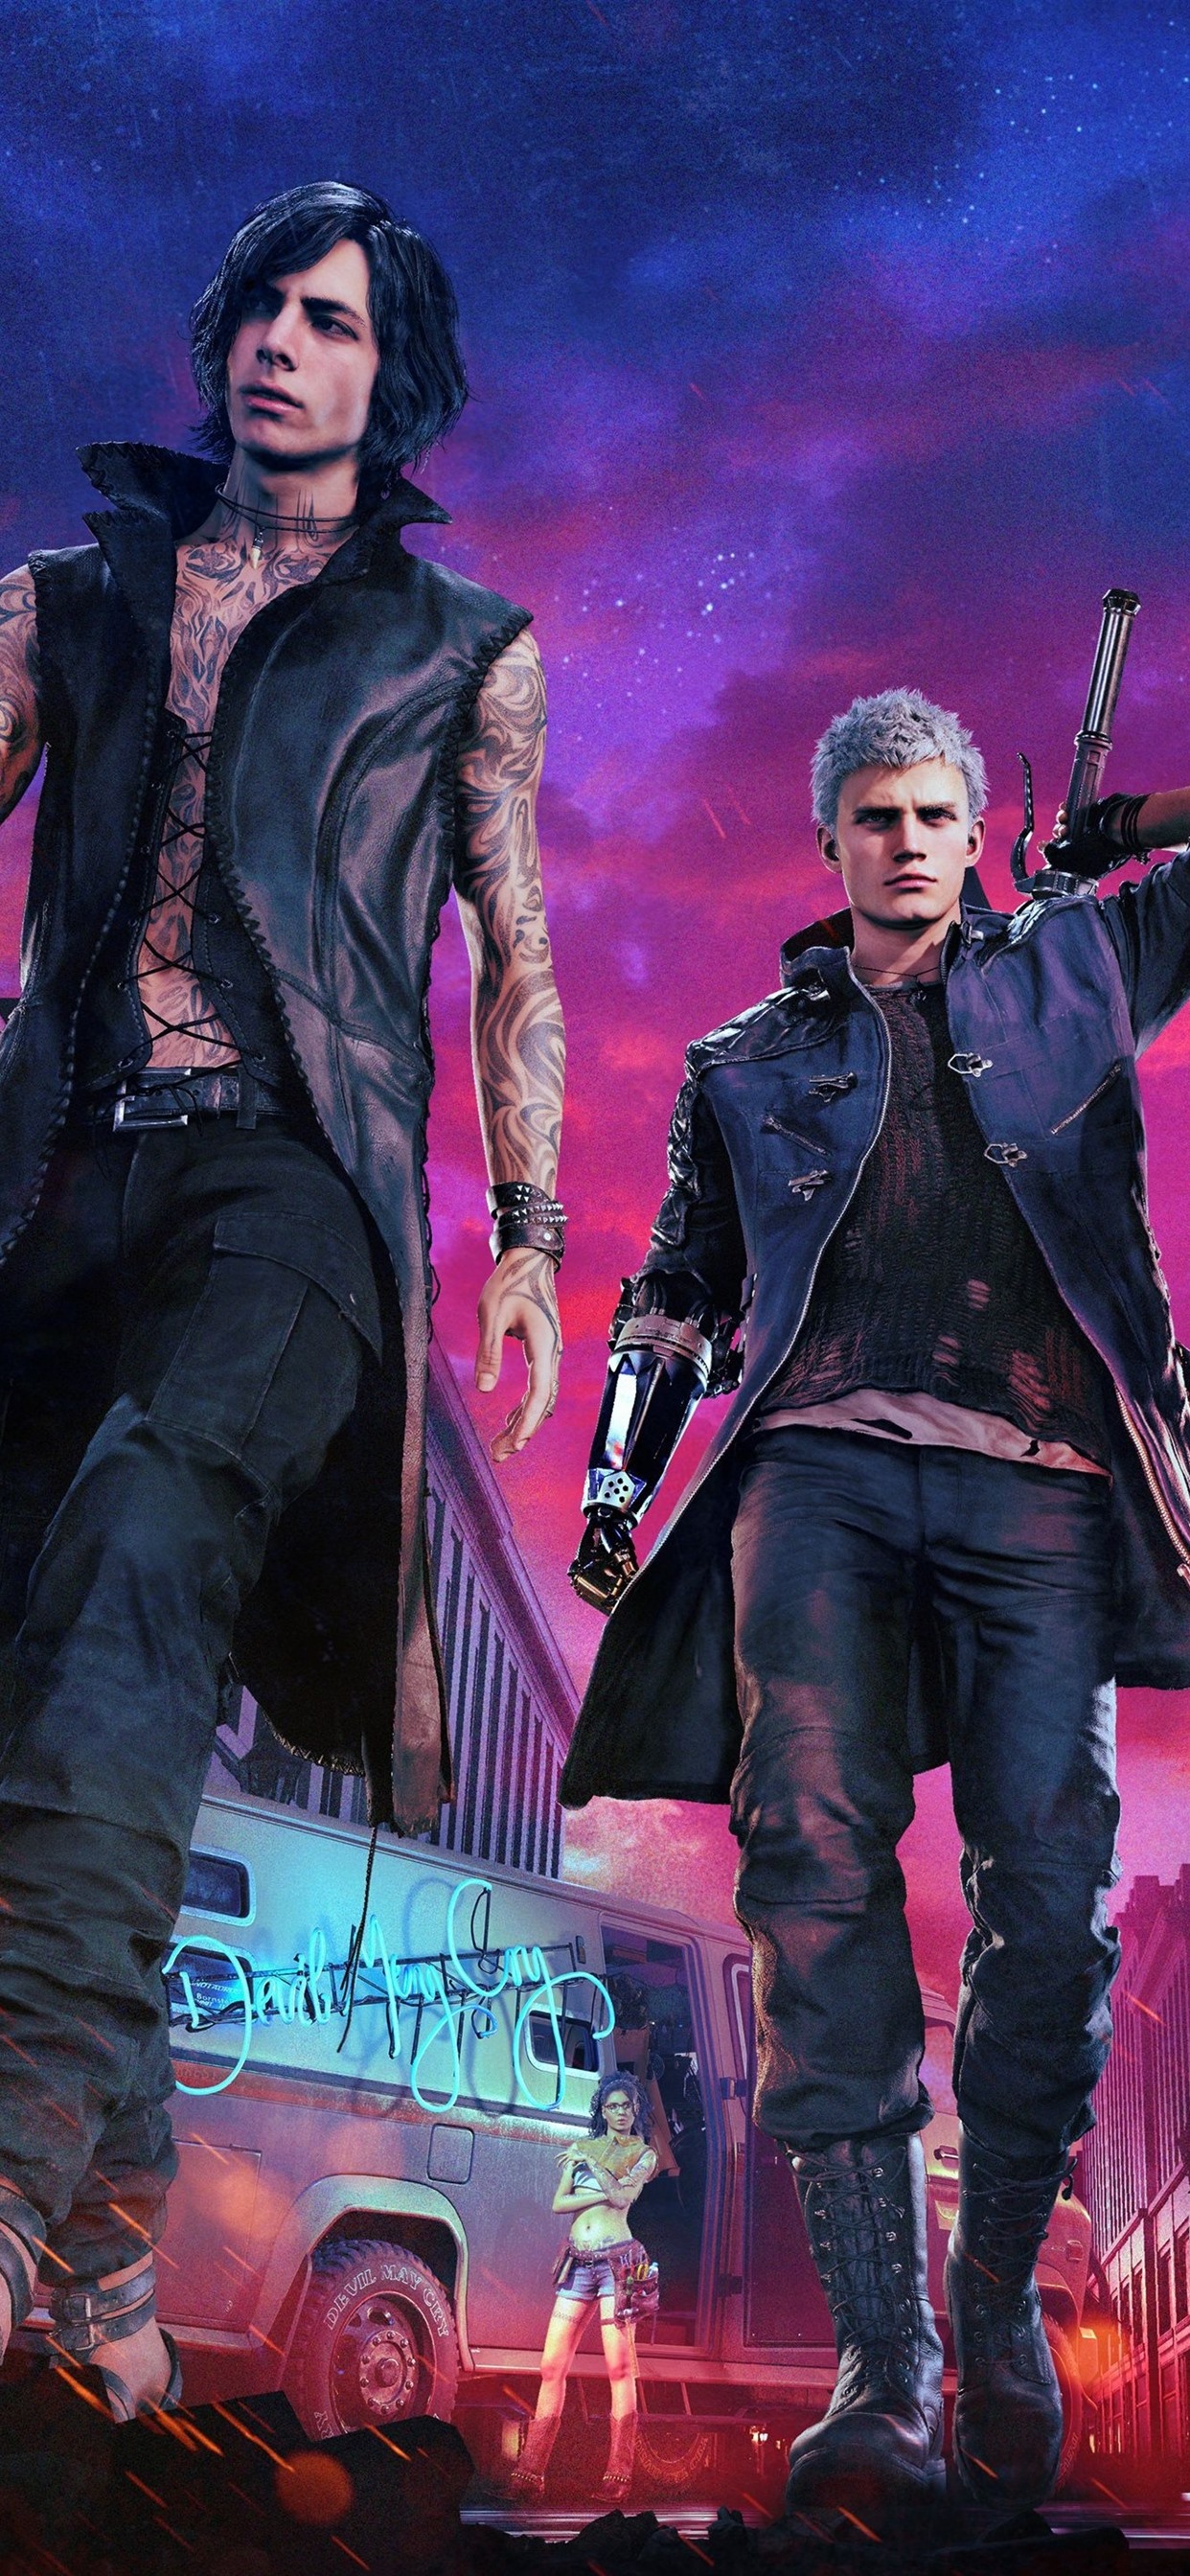 Iphone Wallpaper Devil May Cry 5, Ps4 Game - Devil May Cry 5 Wallpaper  Iphone - 1242x2688 Wallpaper 